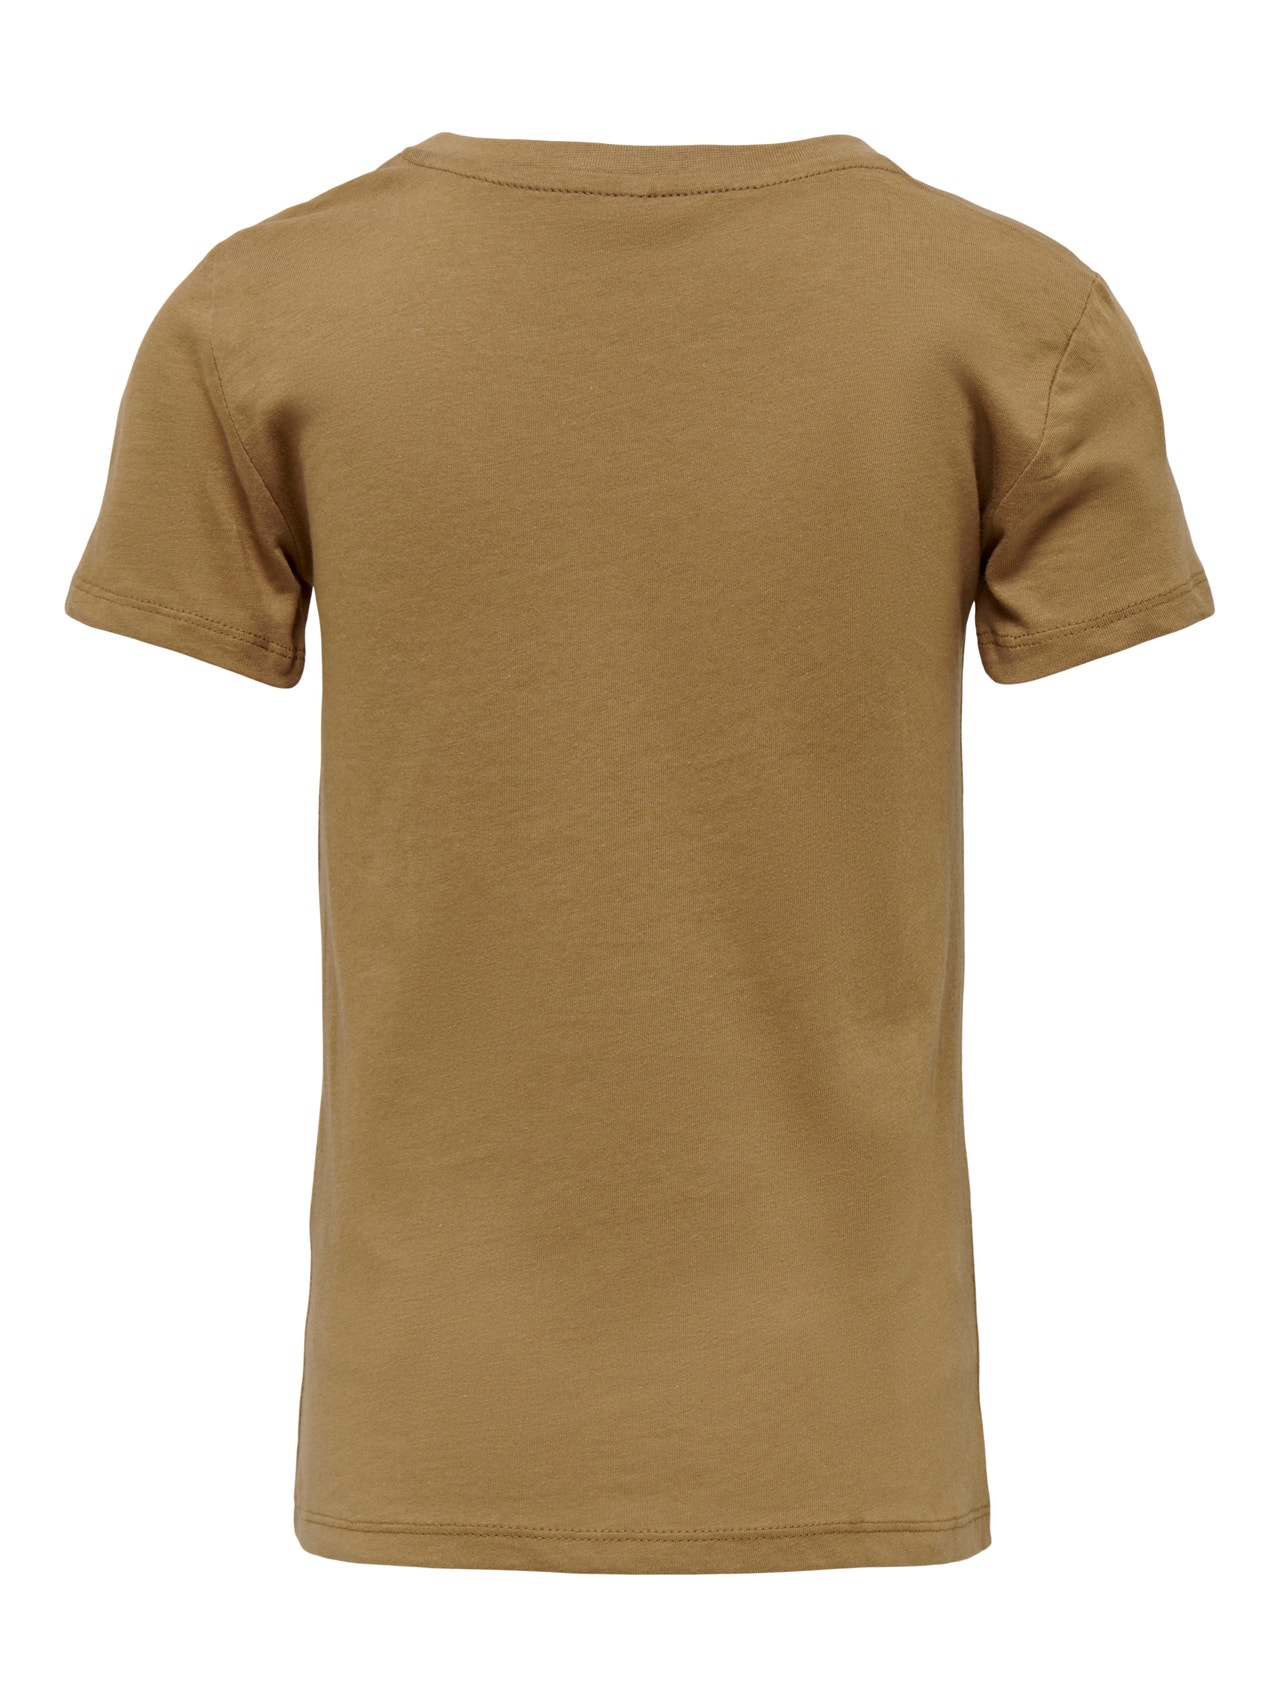 ONLY Slim Fit Round Neck T-Shirt -Toasted Coconut - 15275506